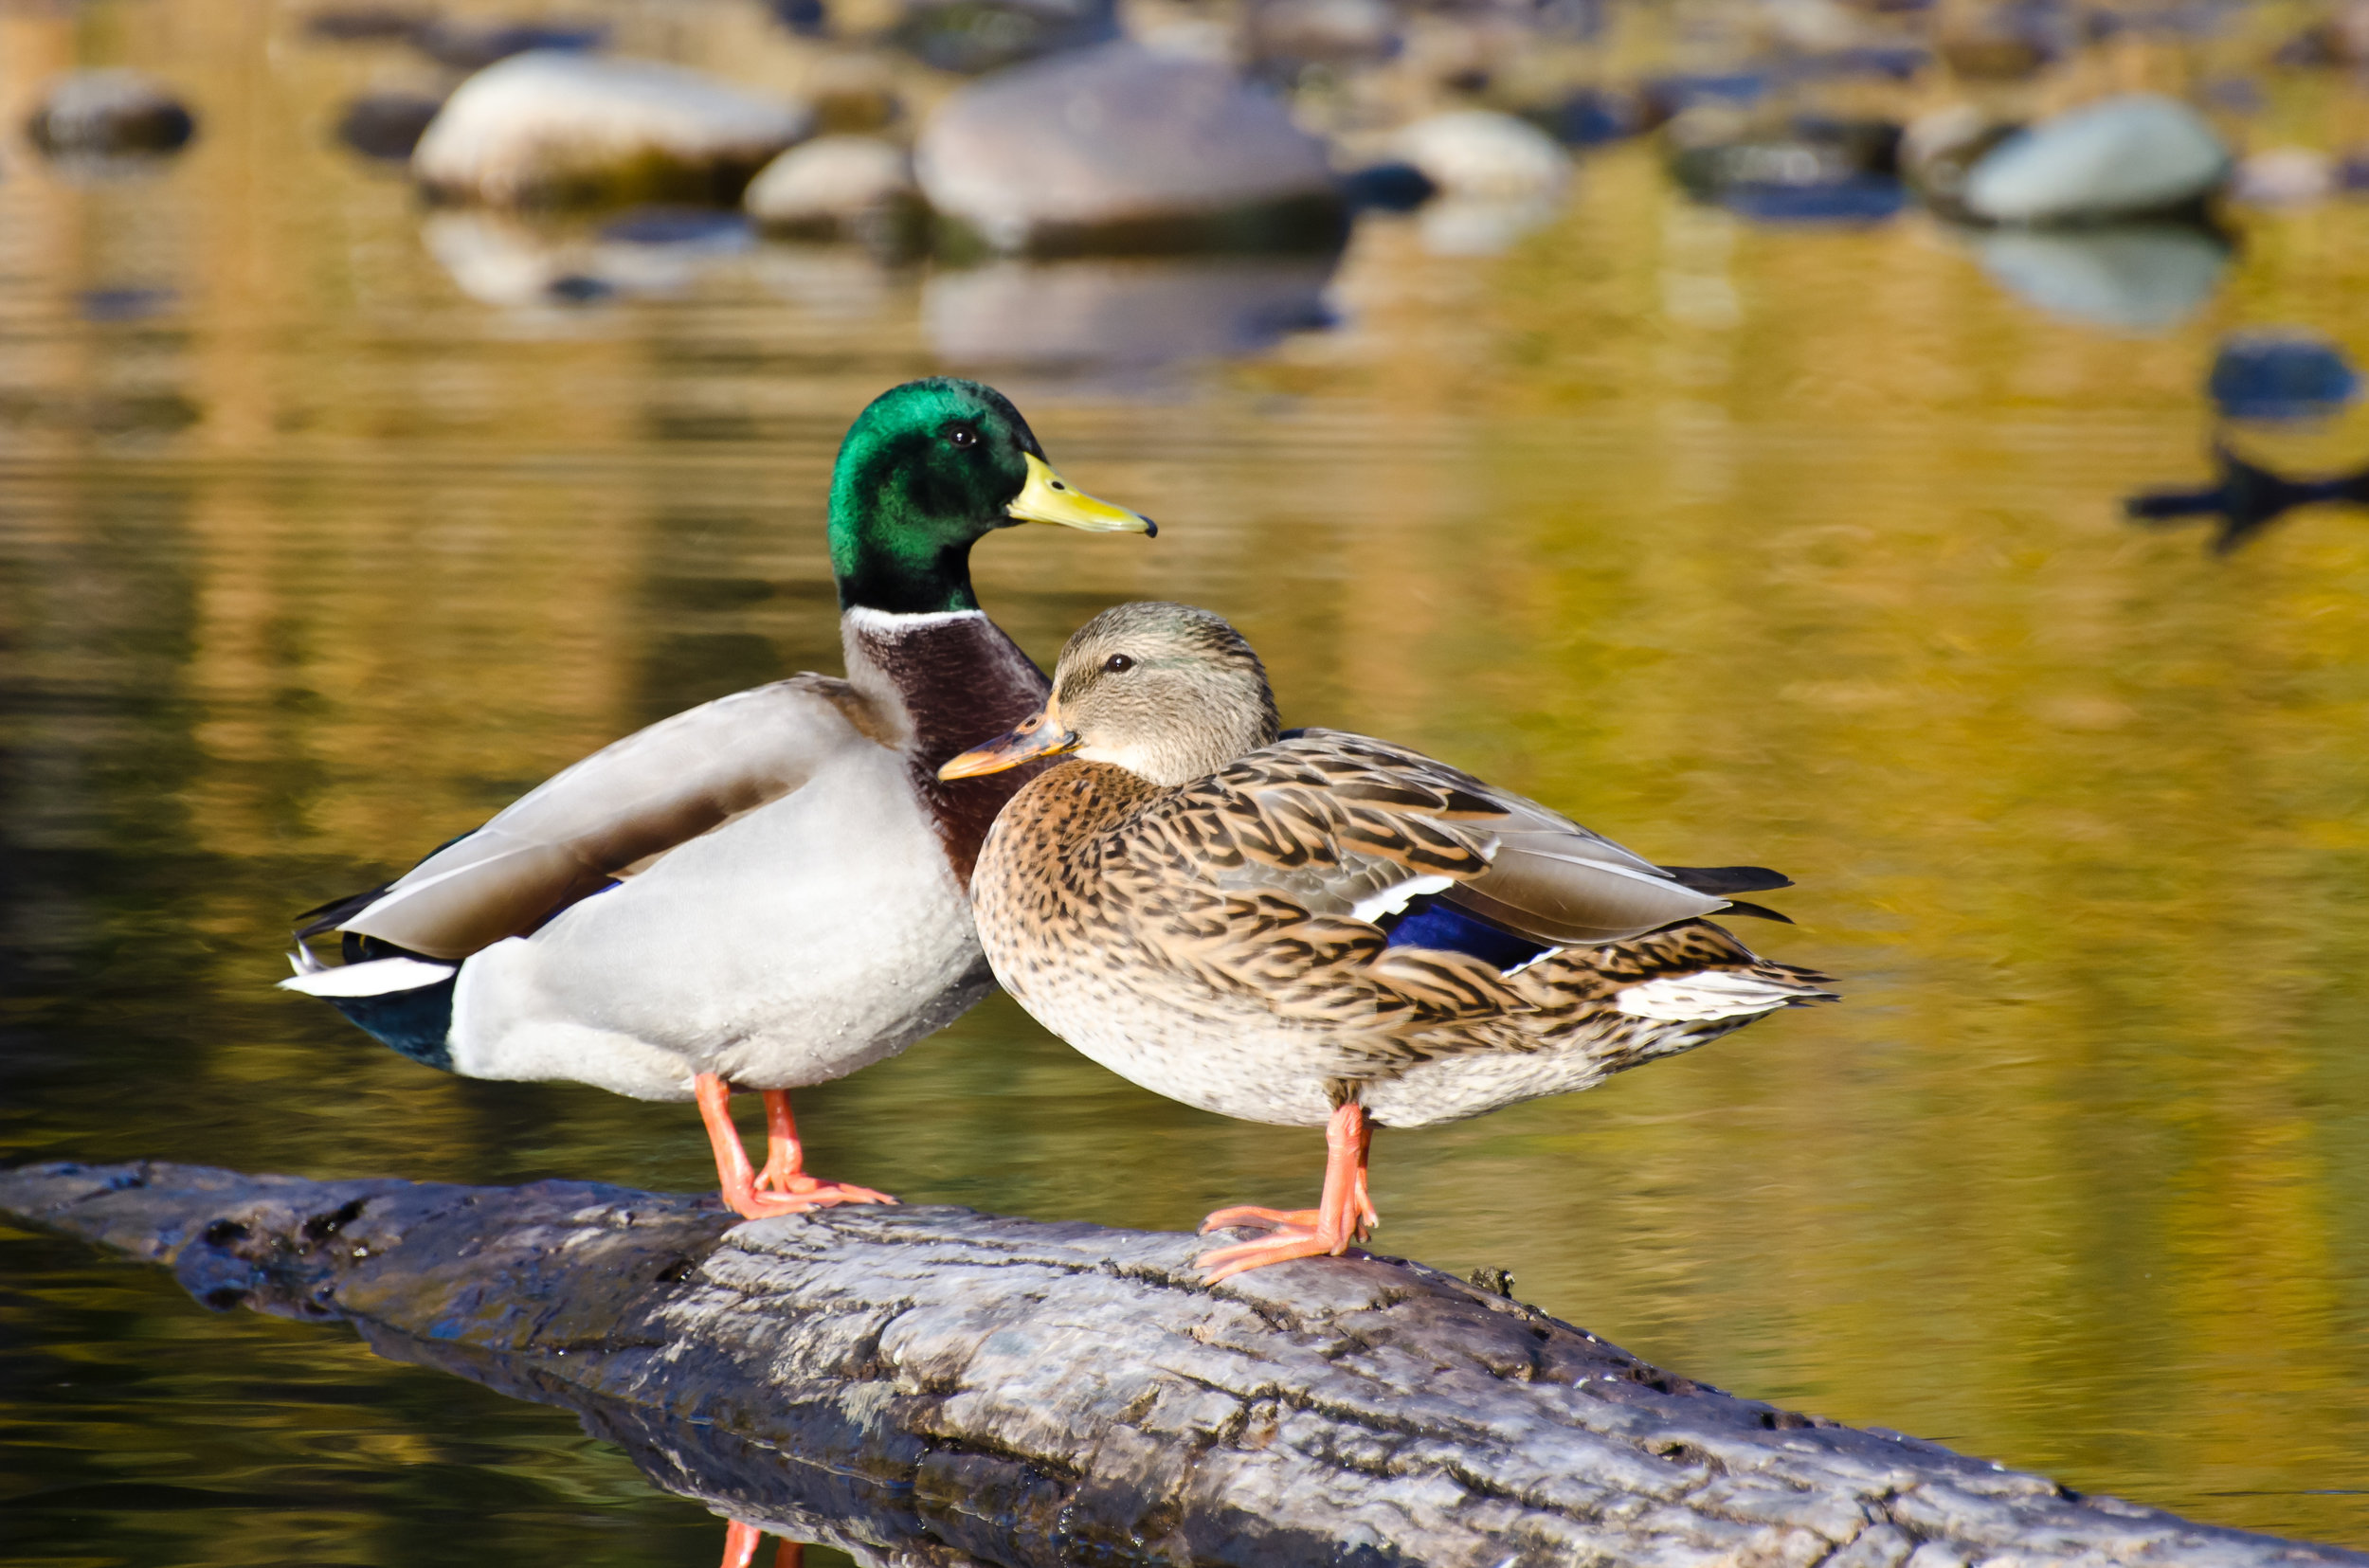 Christian Middle School in Dulles Virginia | Private Christian School Near Me | Two Ducks on a Log